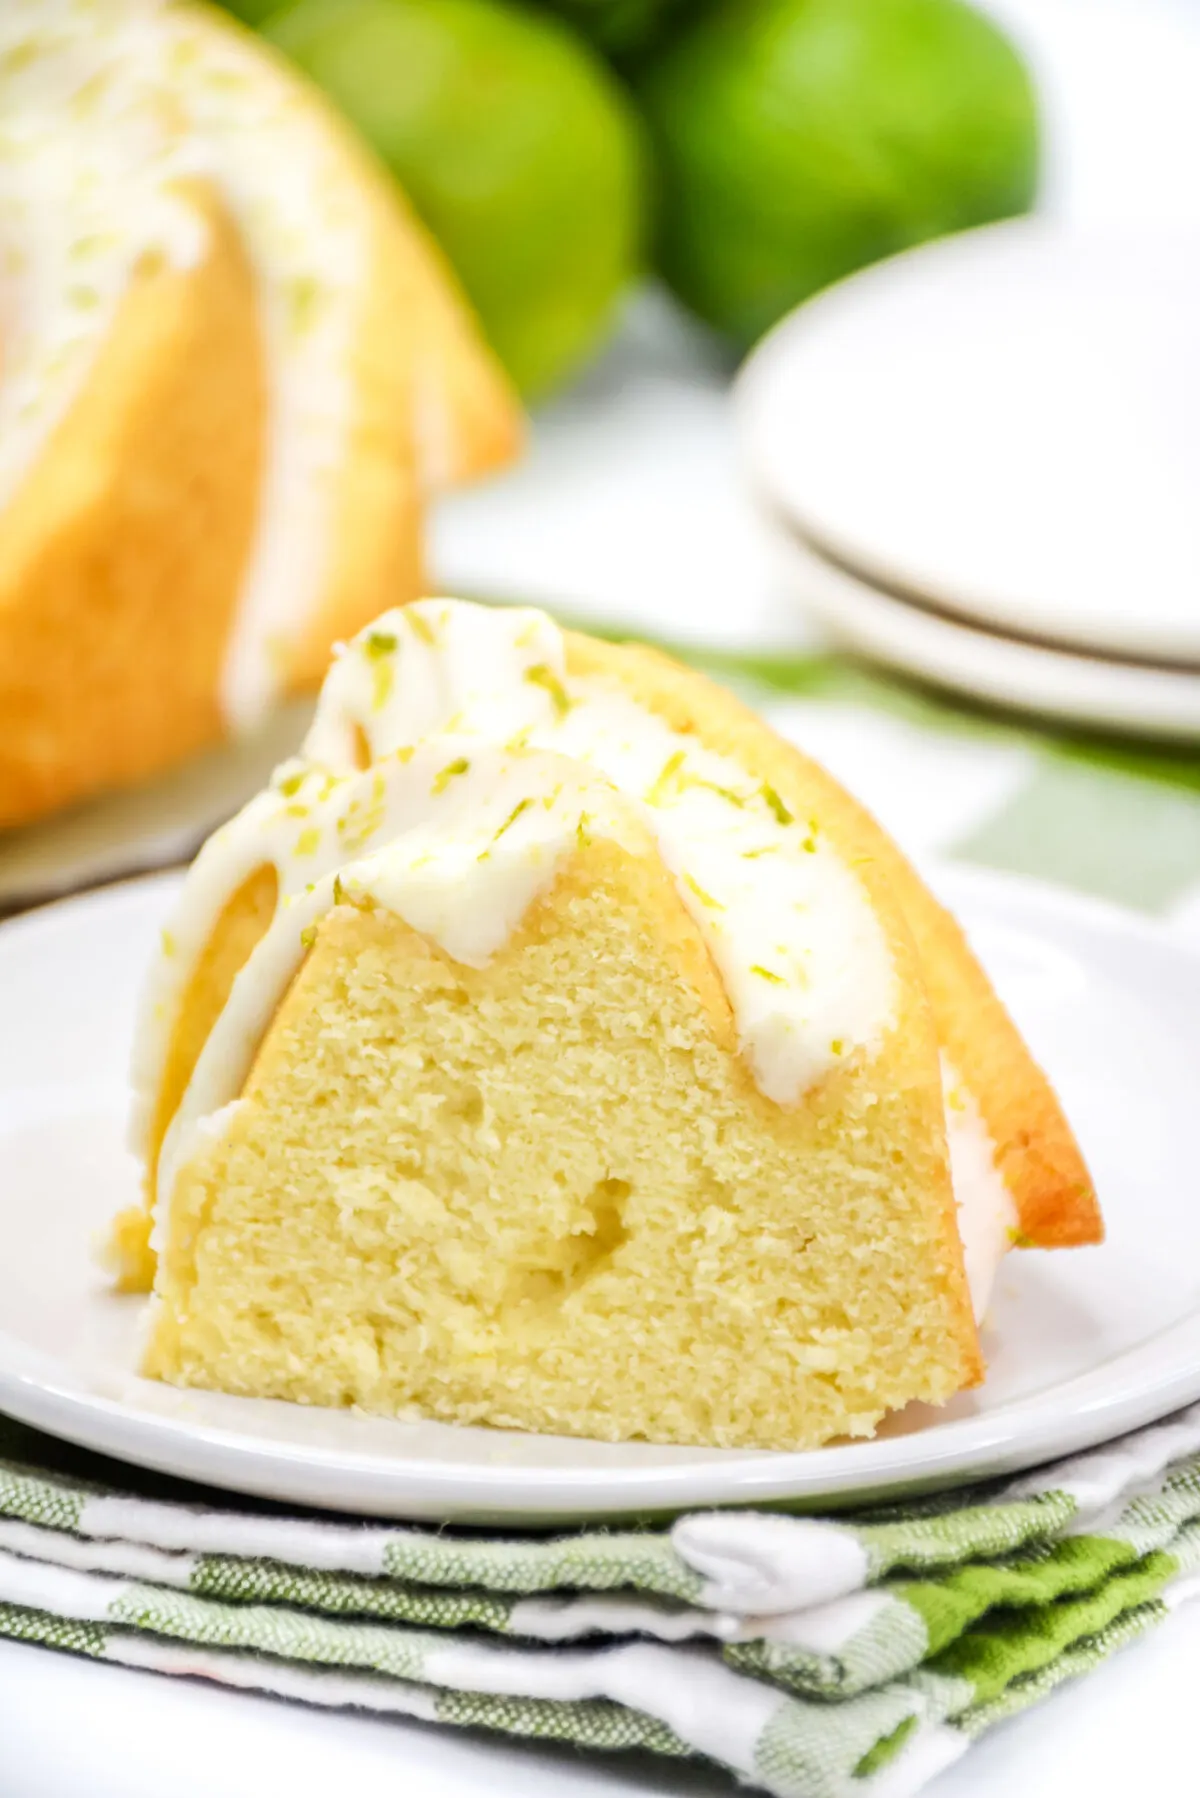 With fresh key limes and basic ingredients, you can make this tasty key lime bundt cake. It's the perfect summer dessert for any occasion!